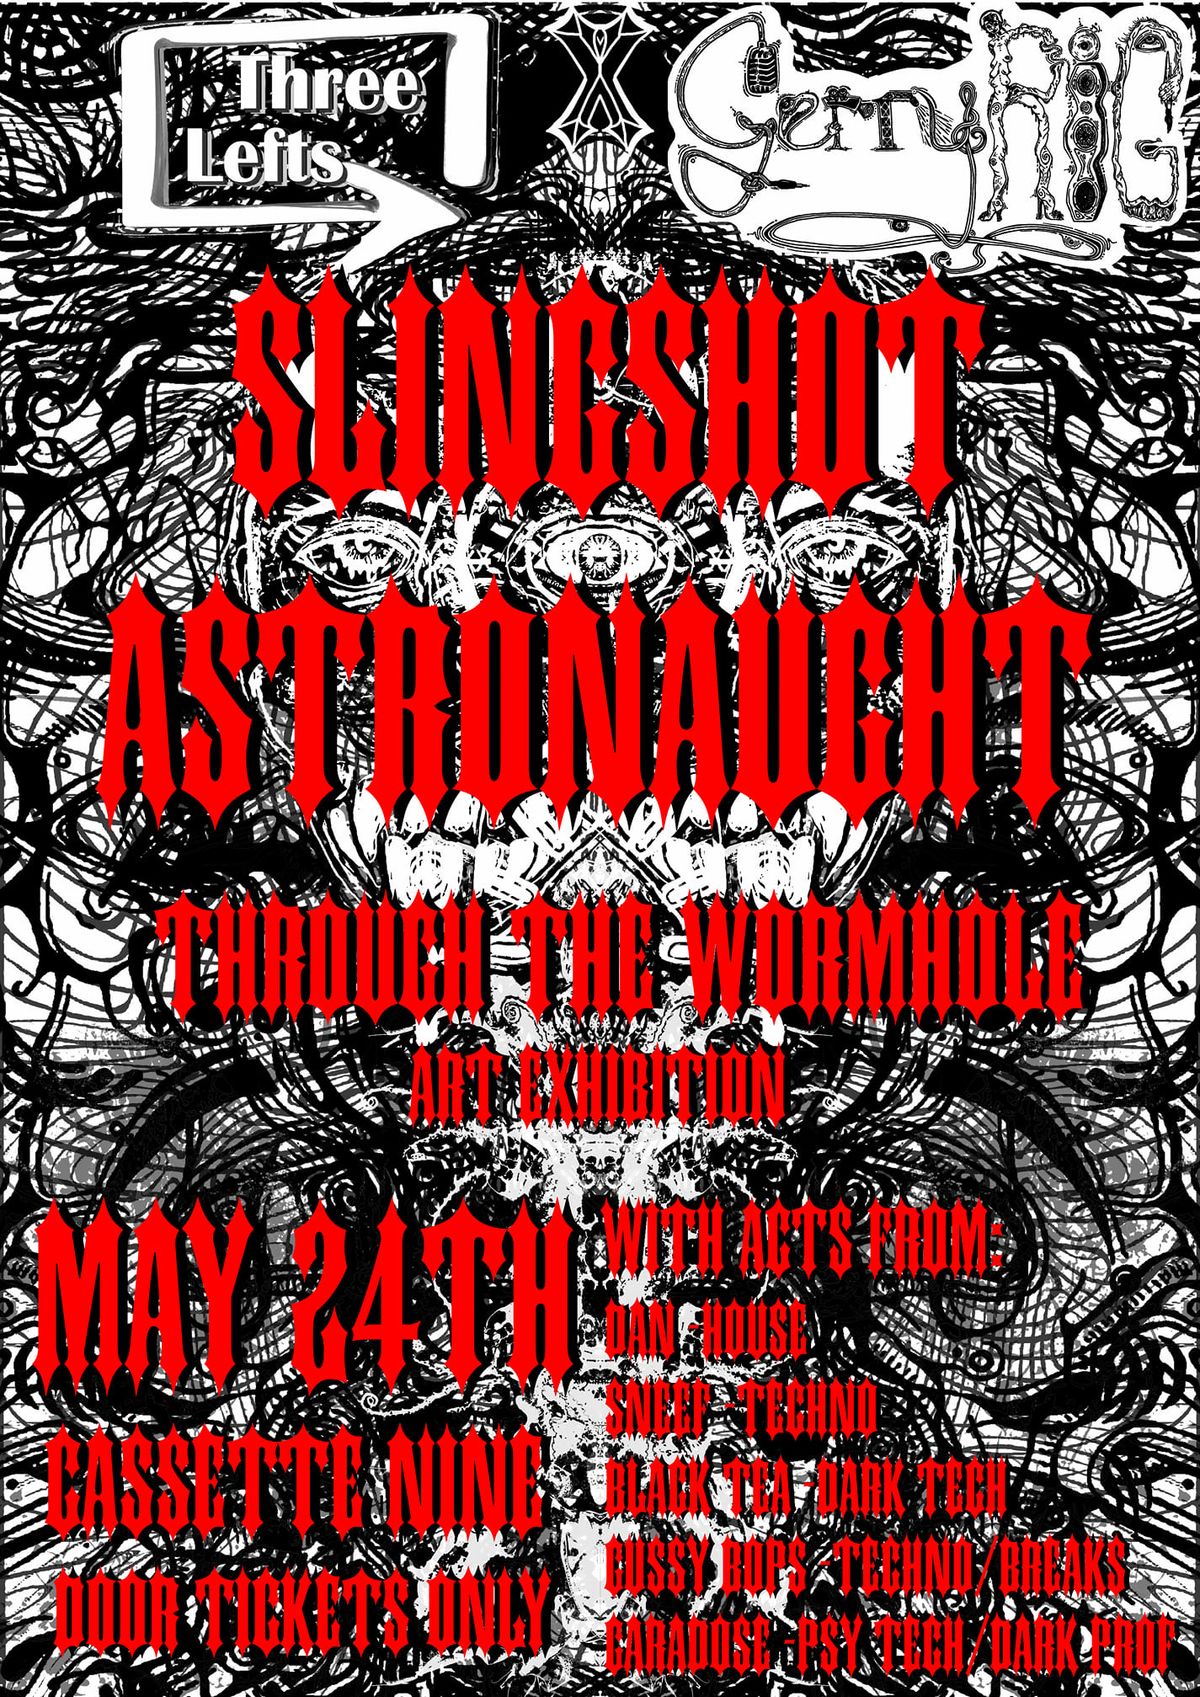 Three Lefts presents: Slingshot Astronaut Through the Wormhole- in collaboration with Gerry Rig